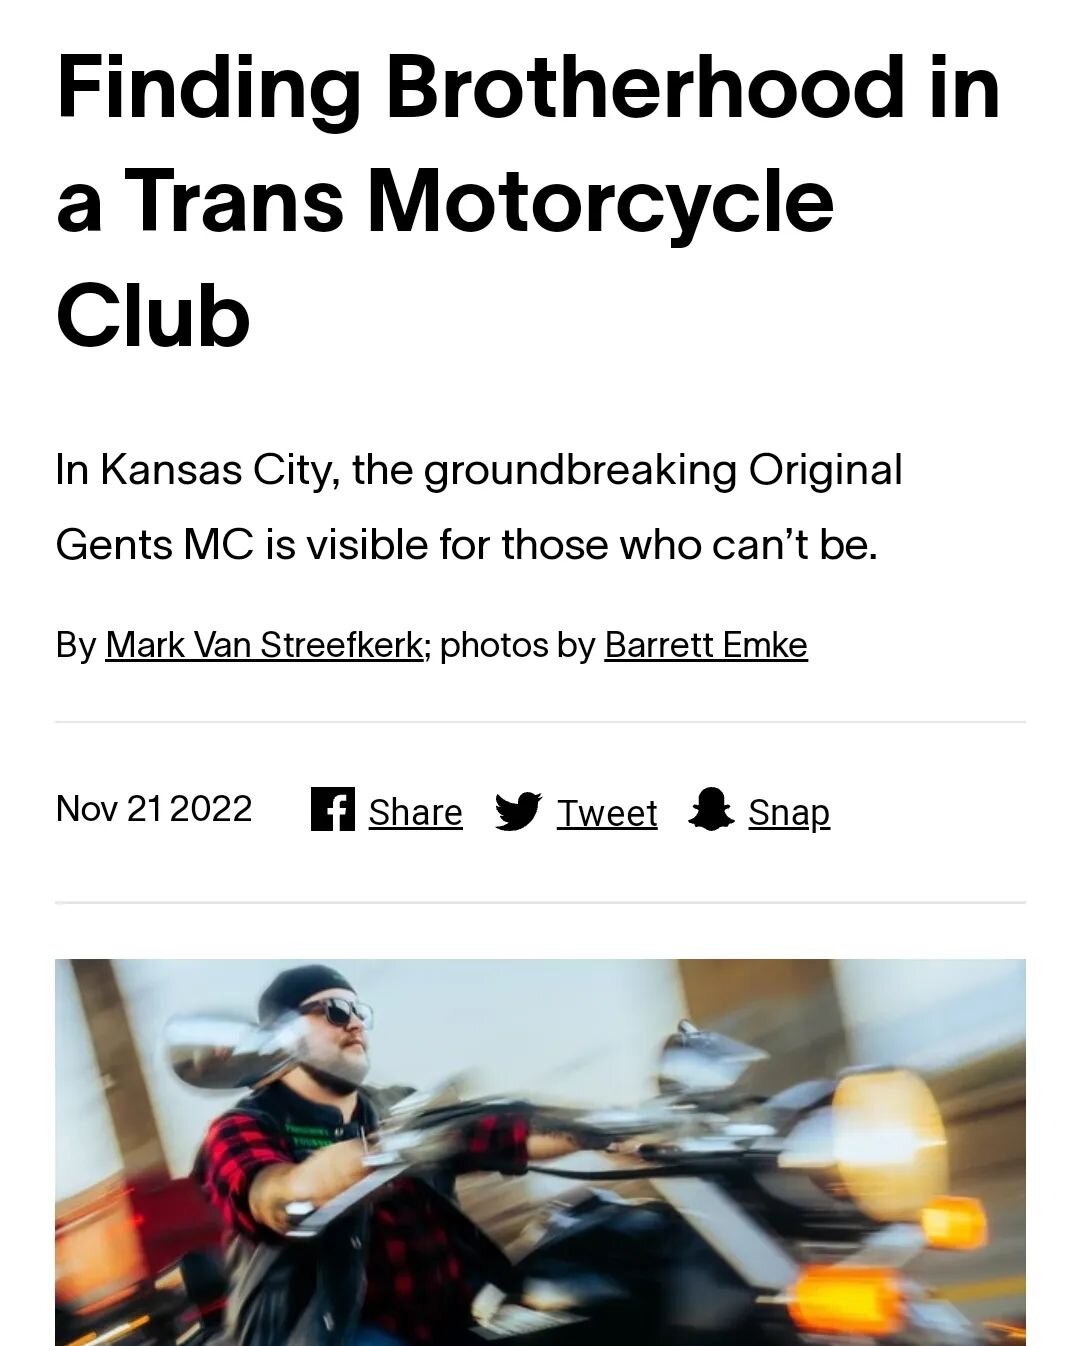 Such an honor to report on @originalgentsmc, the first motorcycle club in the world by trans men and transmasc people, for @vice 

I got to chat with the club about bikes, what it means to be visible in Kansas City, and their annual TDOR ride. 

&quo